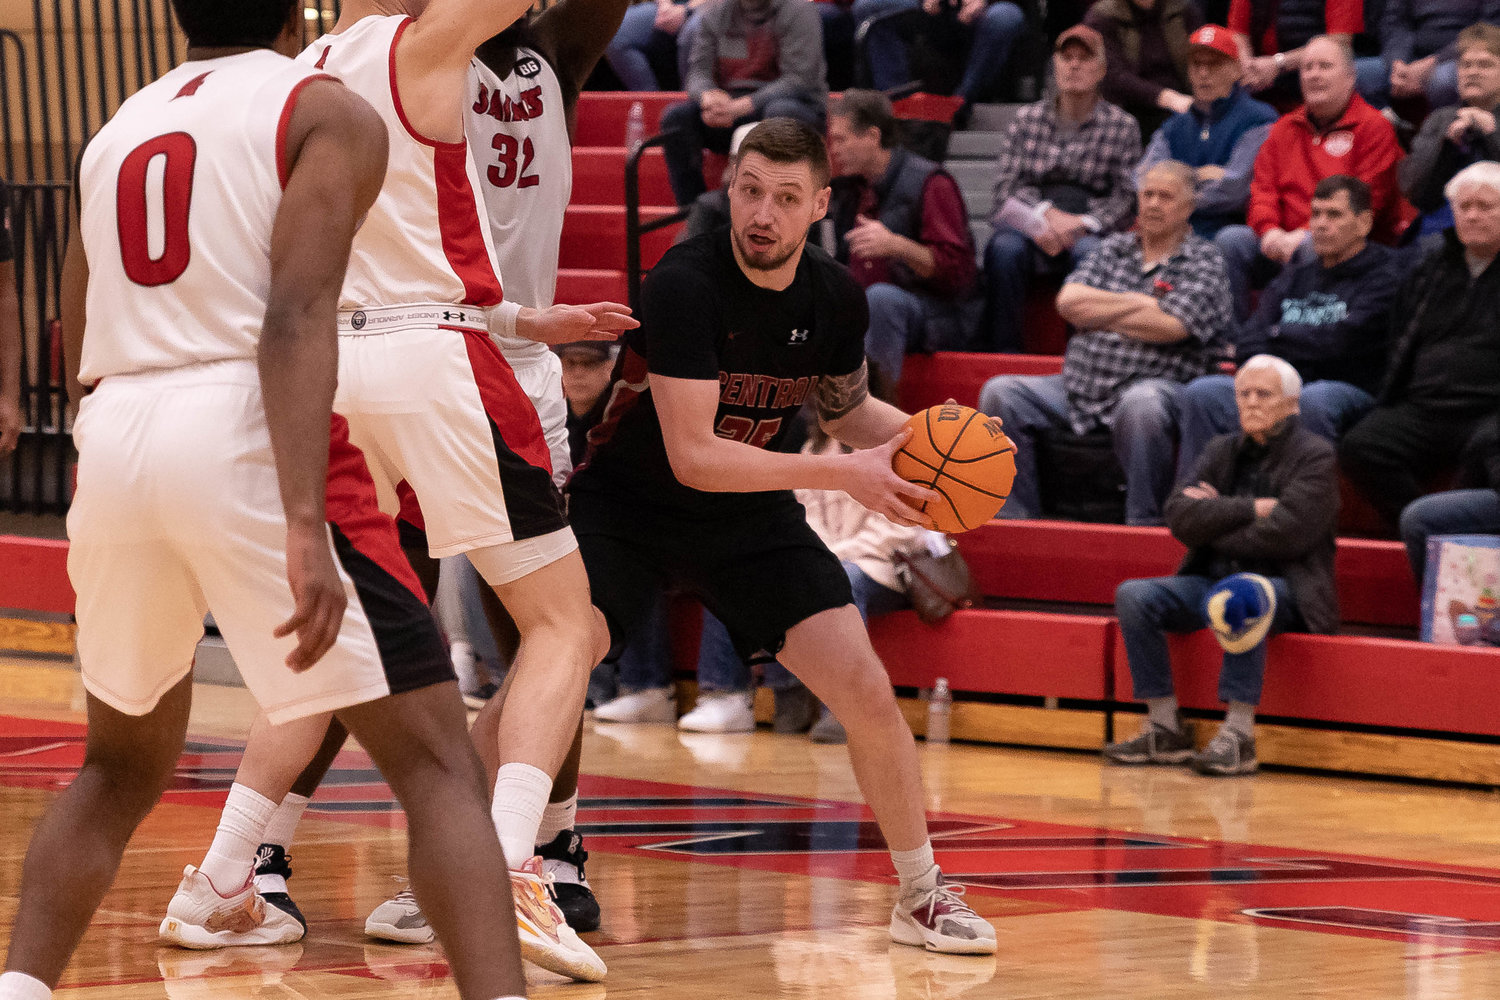 Central Washington forward Matt Poquette looks to pass out of a double team in a 77-75 win over Saint Martin's at Marcus Pavilion Feb. 23.